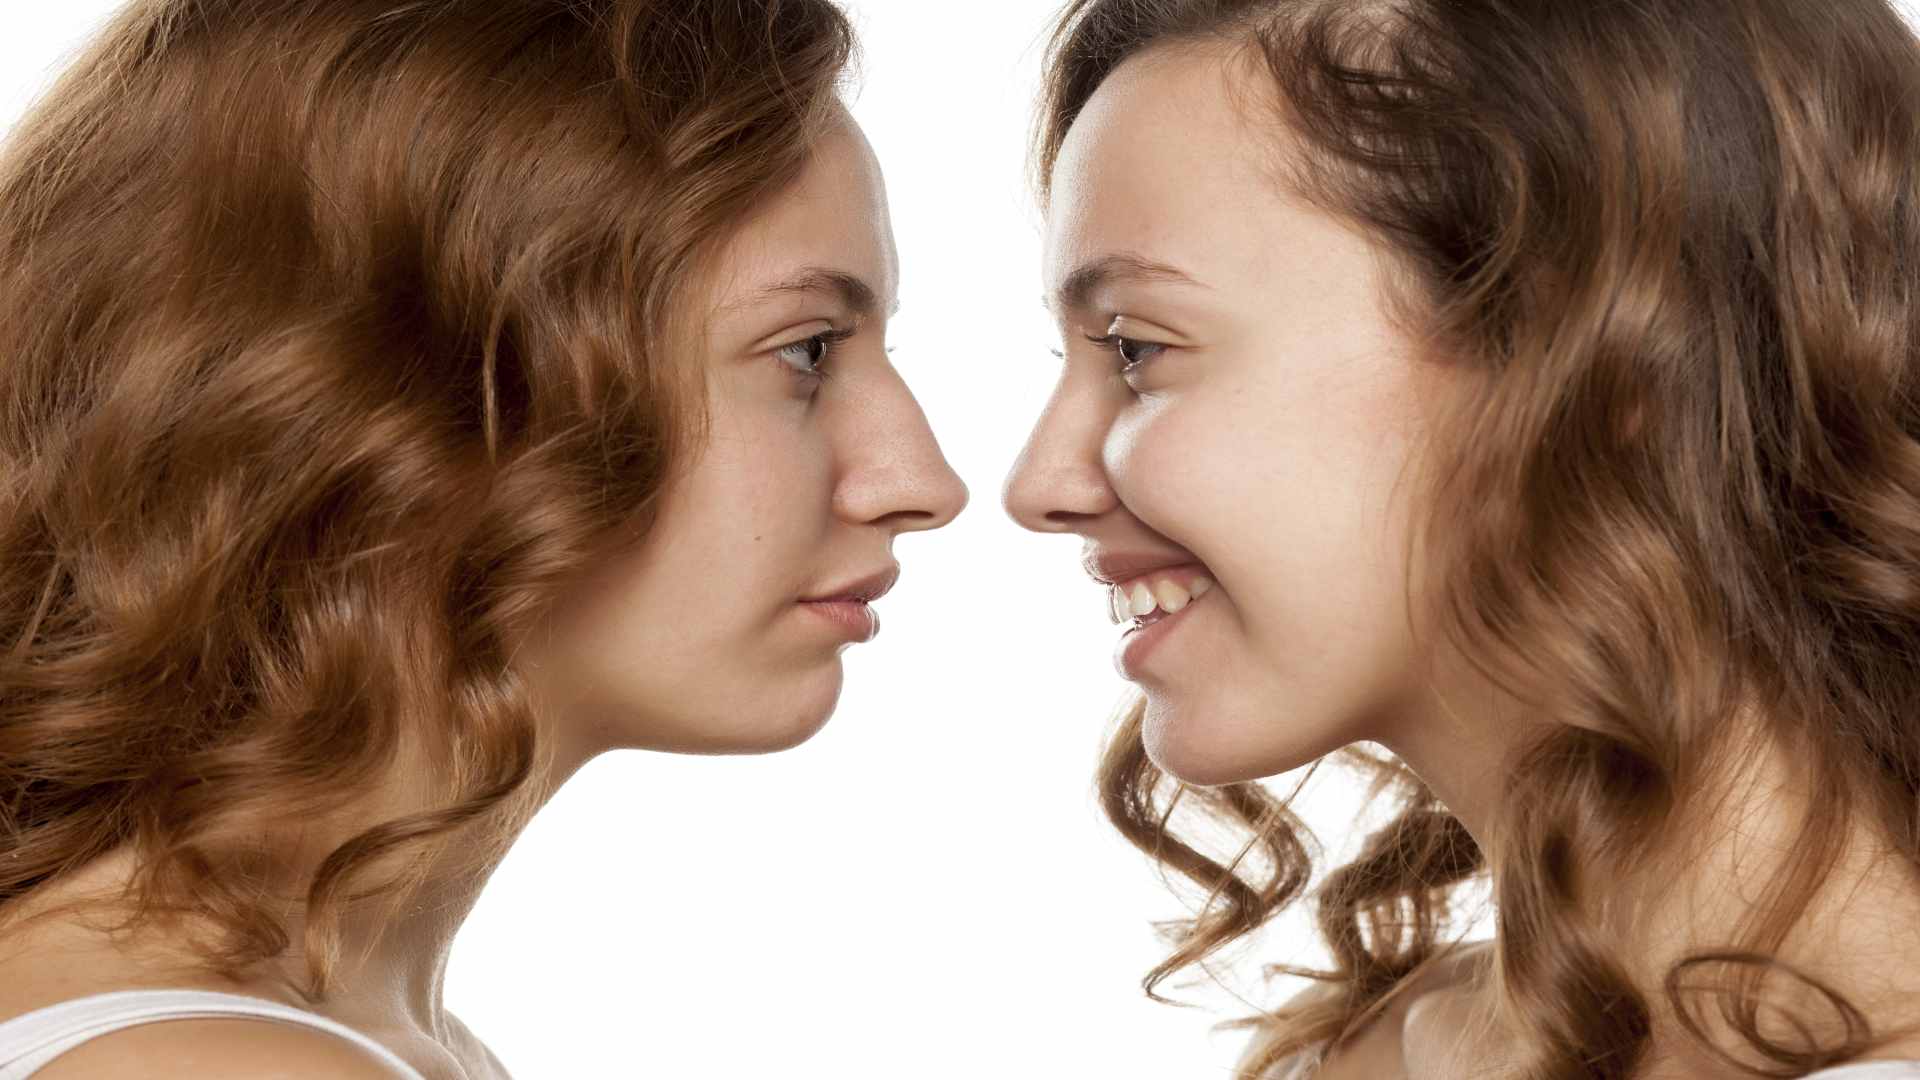 Nose Job Procedure; Before and After